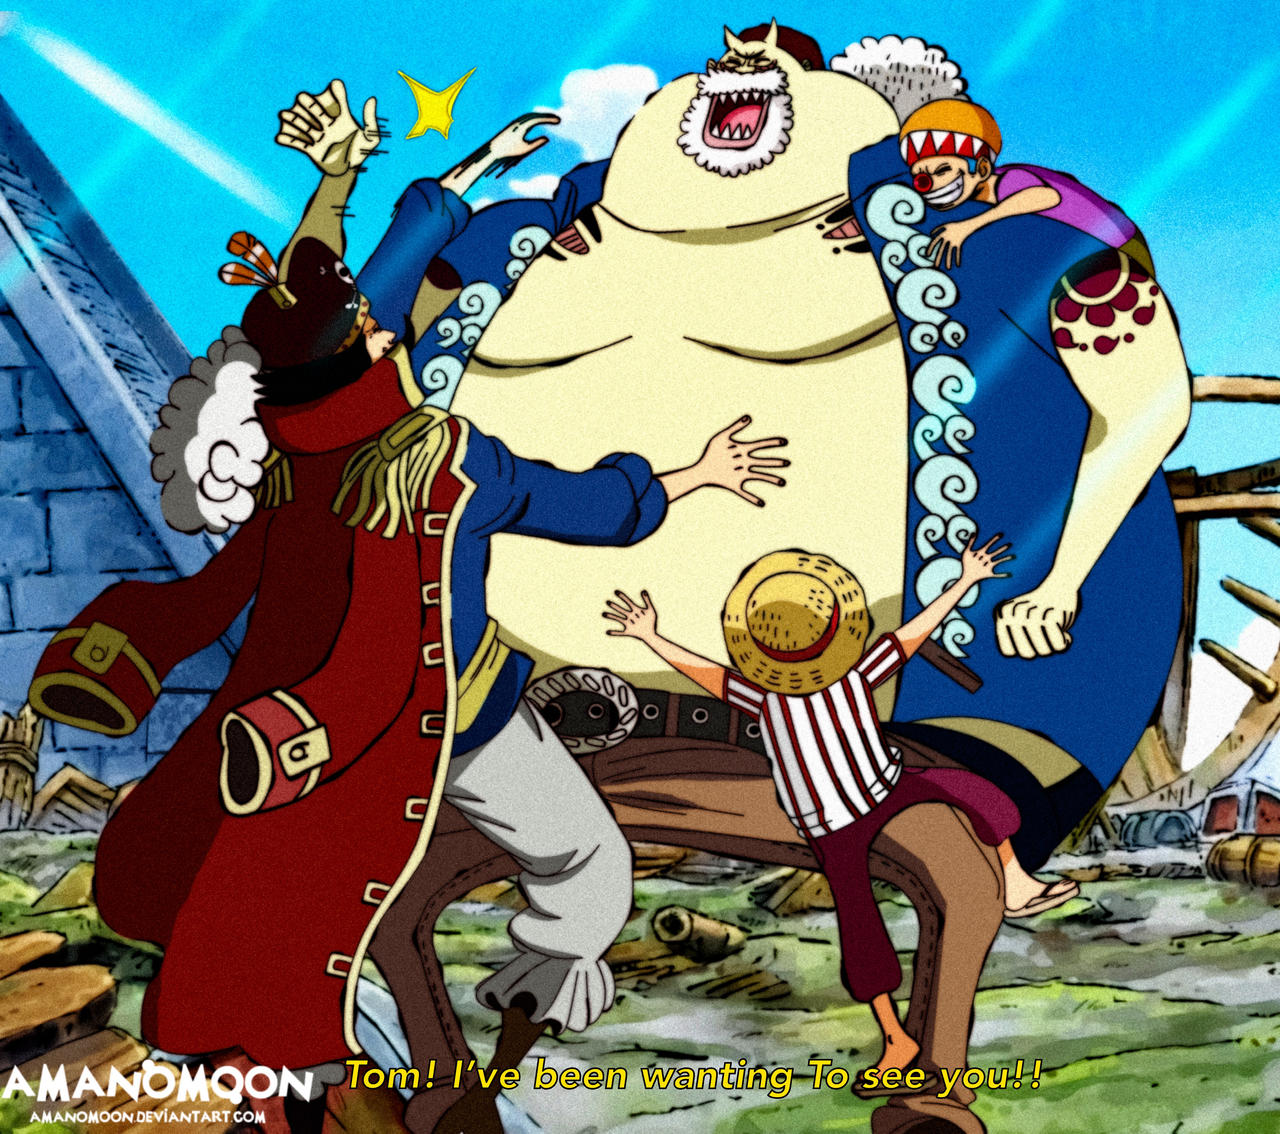 Gold Roger or Gol D Roger? The 'One Piece' Pirate's Name, Explained